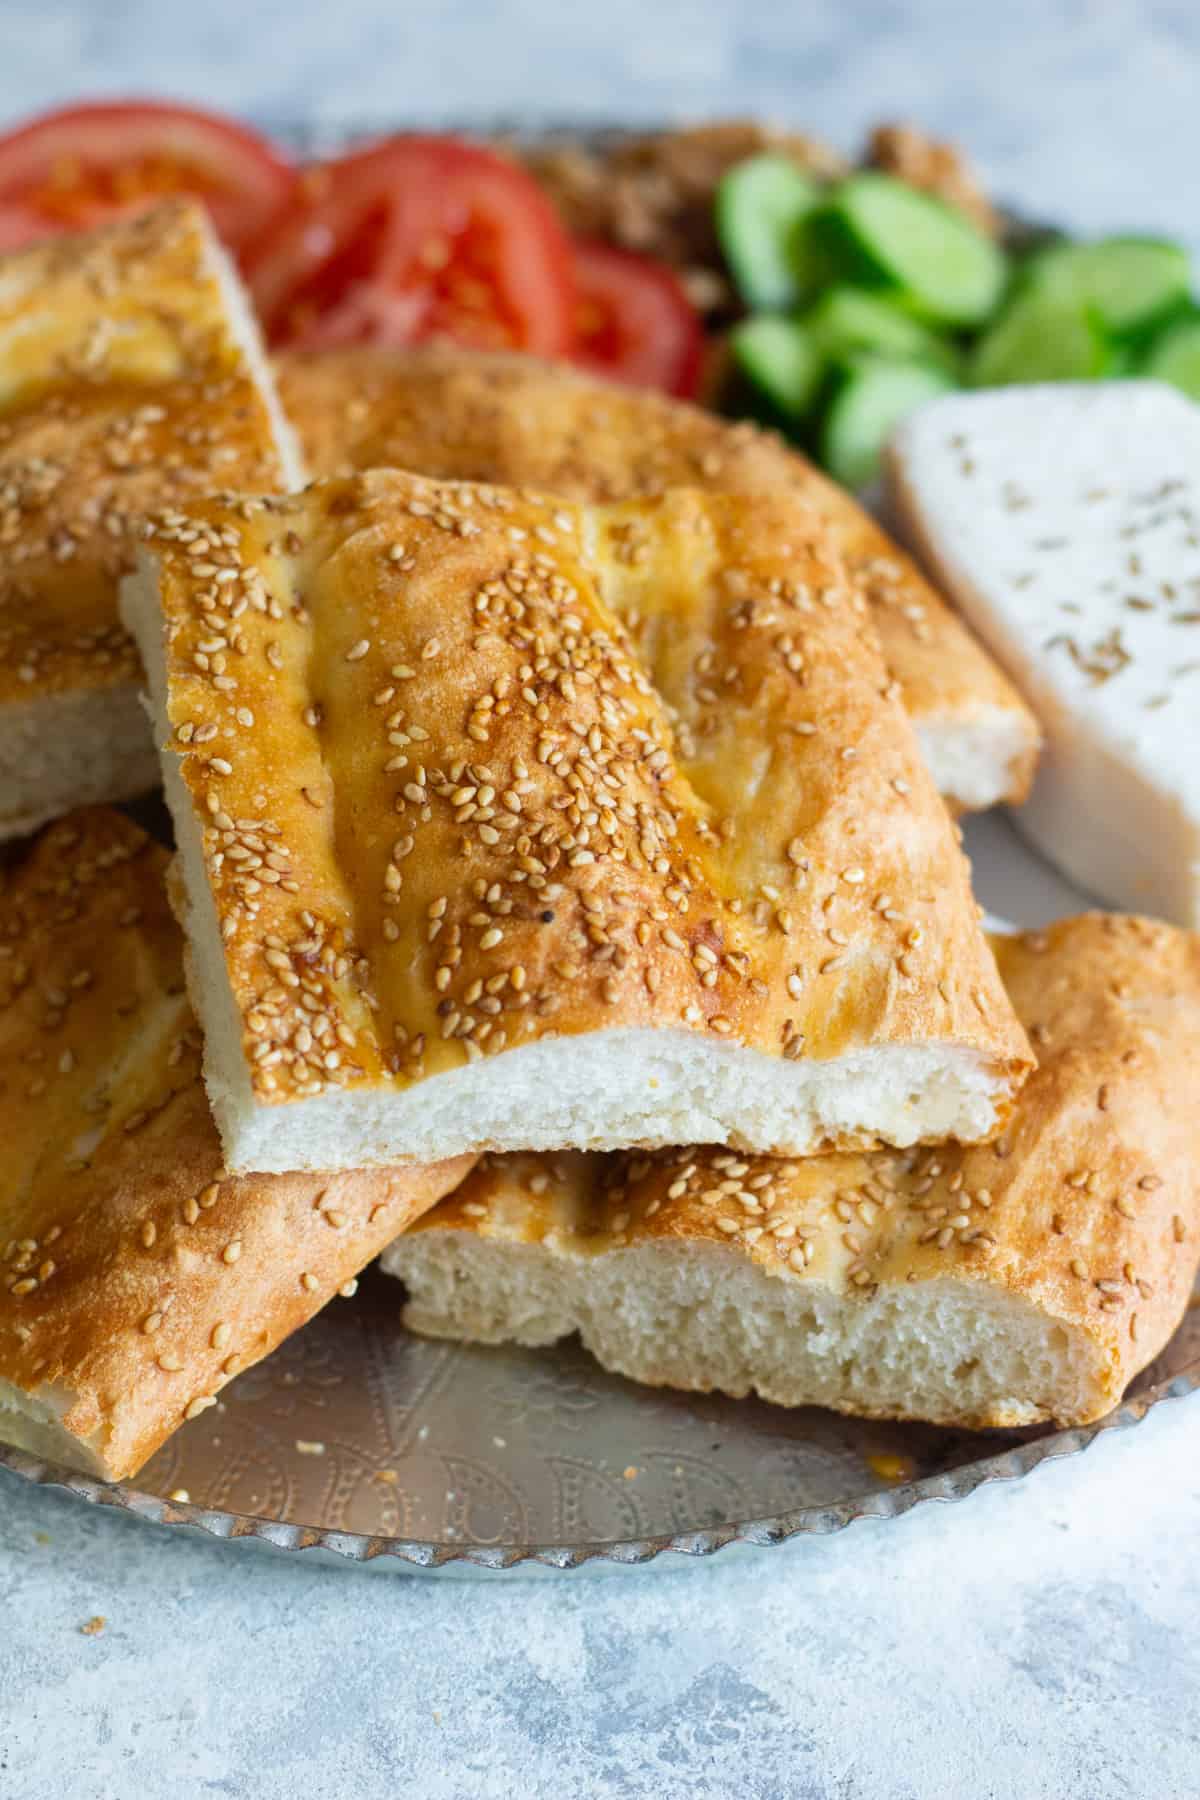 Nan barbari is a classic Persian bread that’s easy to make. With a nice crust and soft inside, this recipe results in a tasty homemade bread suitable for breakfast, lunch or dinner! 
